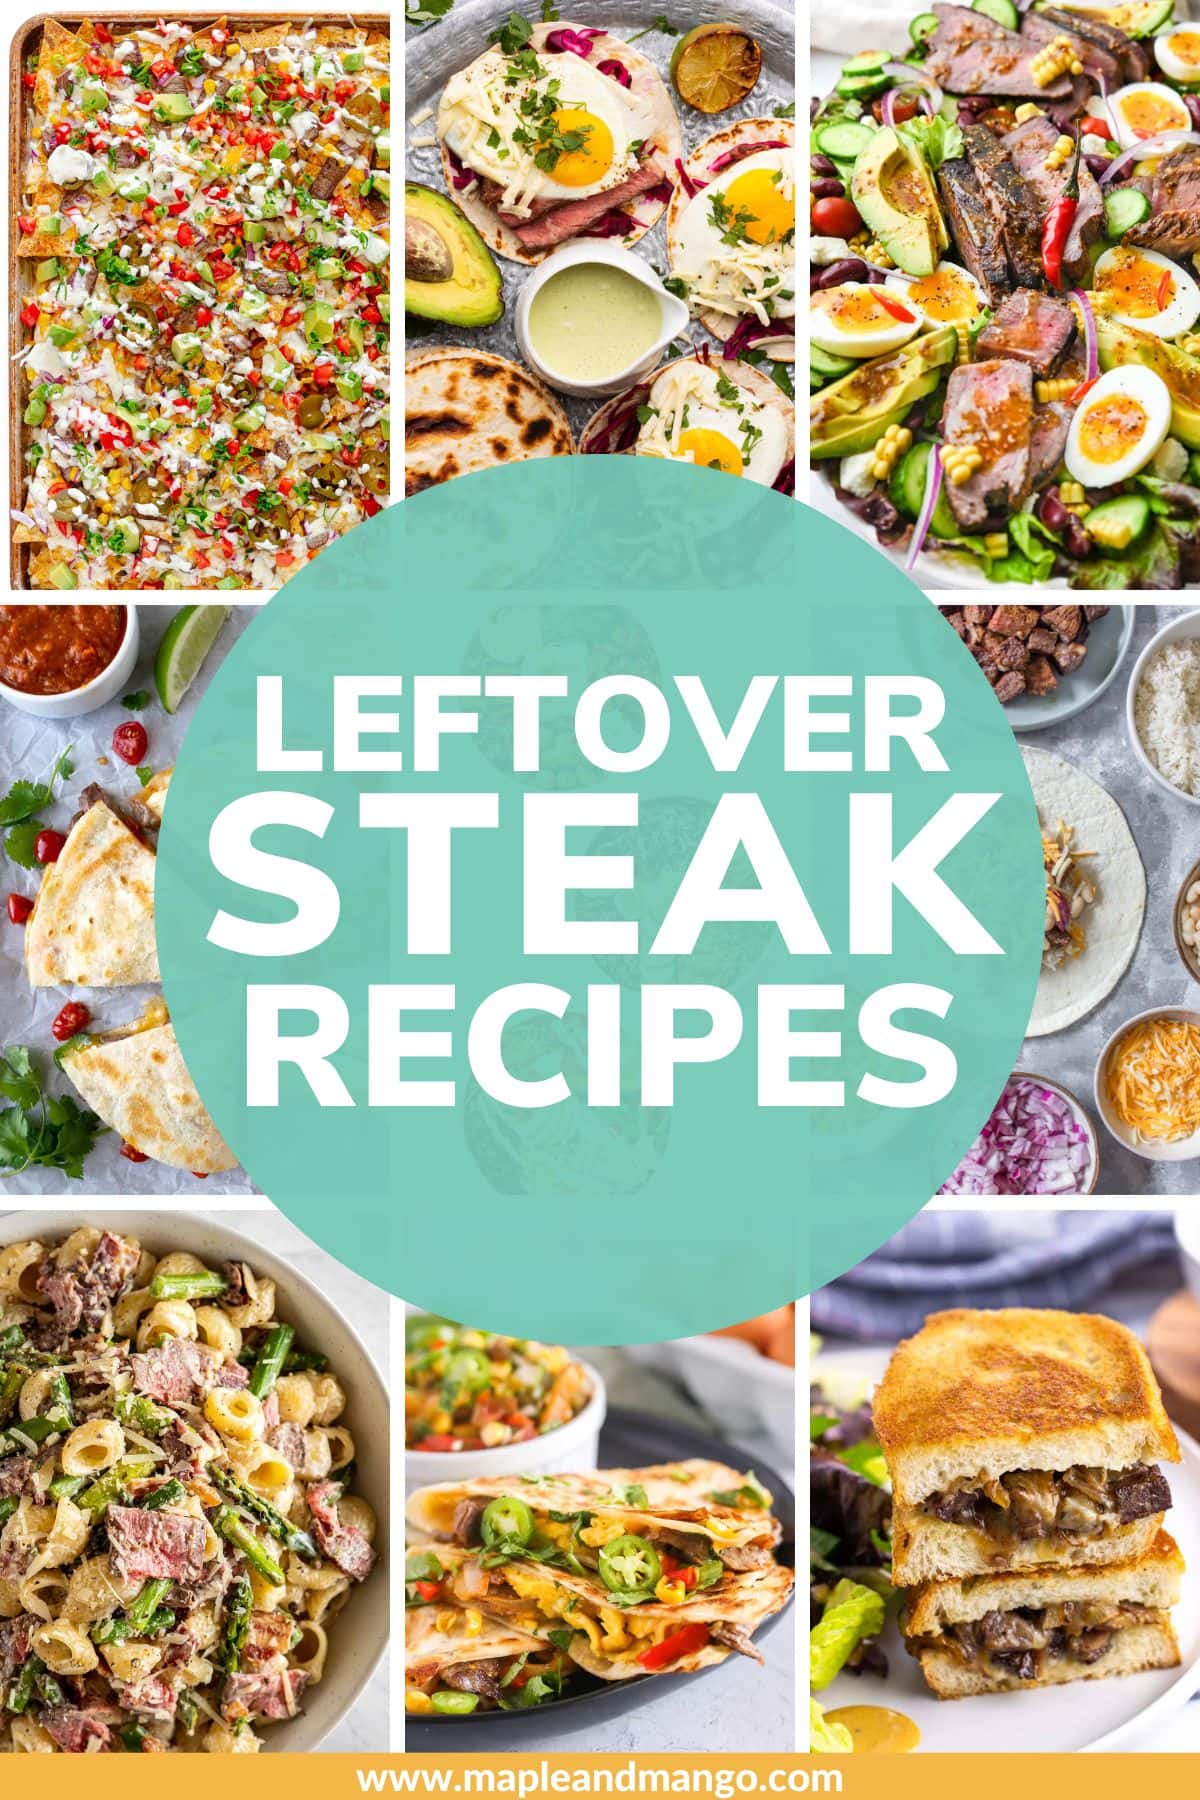 Photo collage of recipes with steak and text overlay that reads "Leftover Steak Recipes".